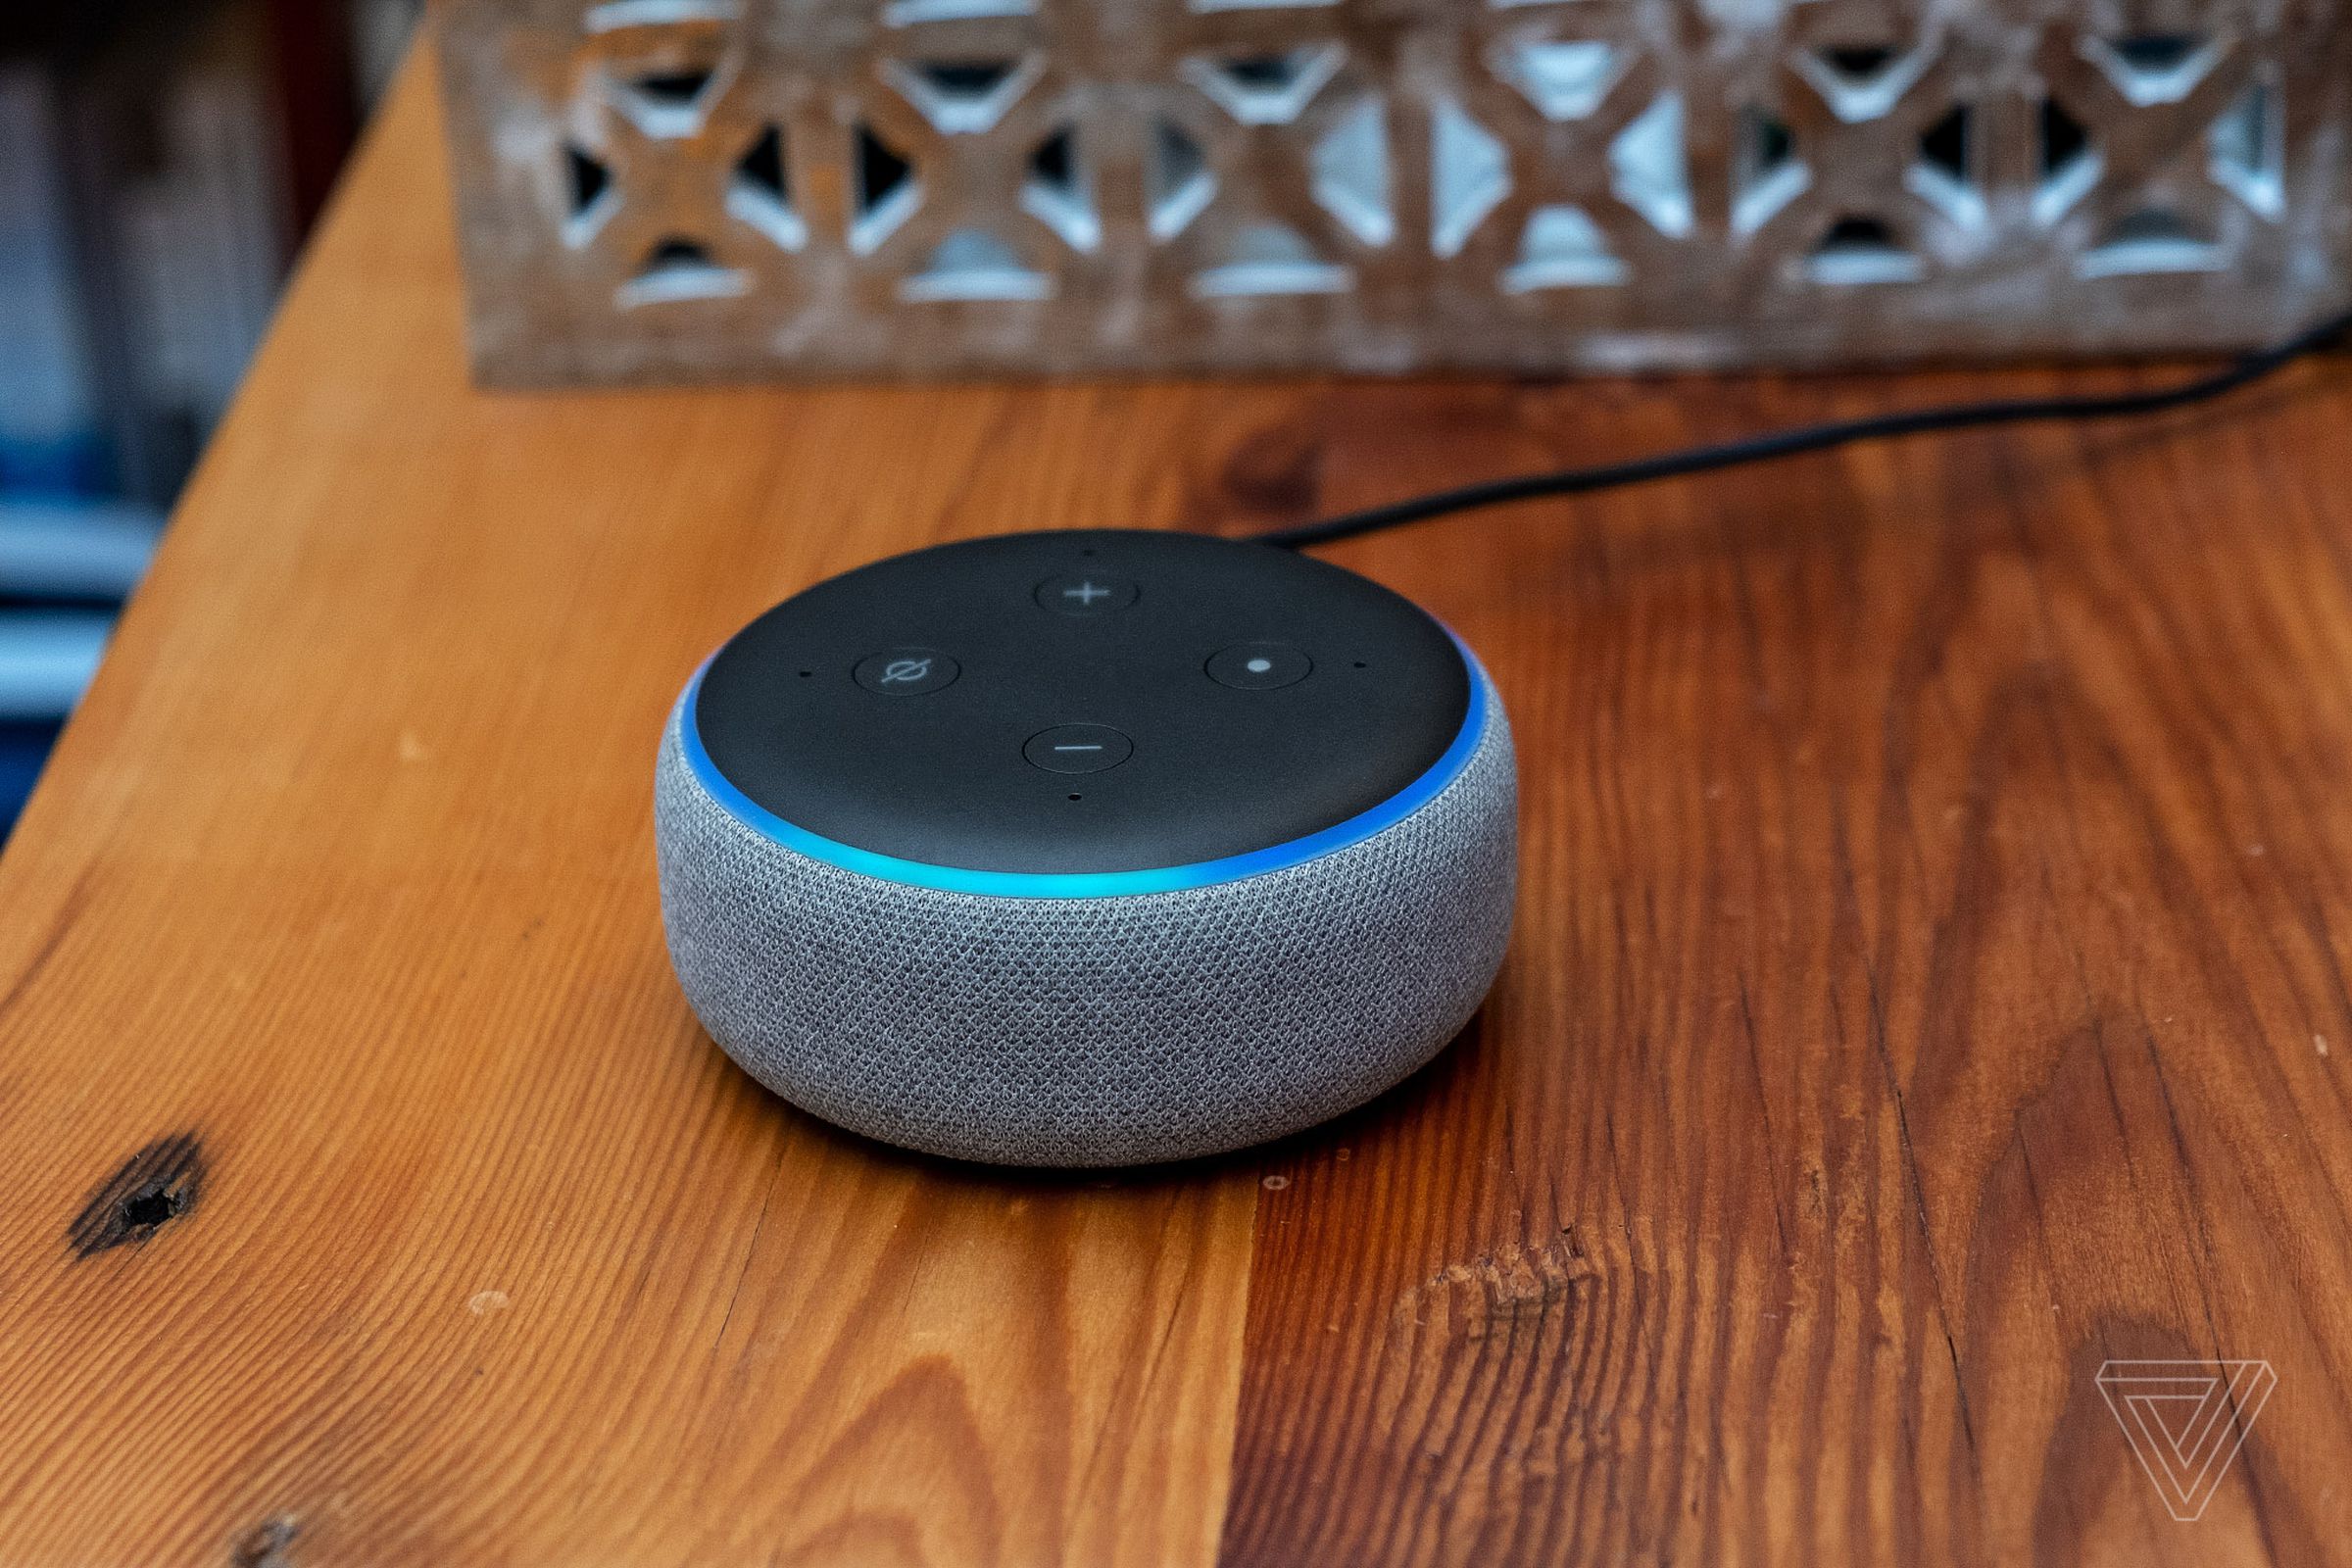 The new speaking style should be arriving on Alexa-enabled devices in the coming weeks. 